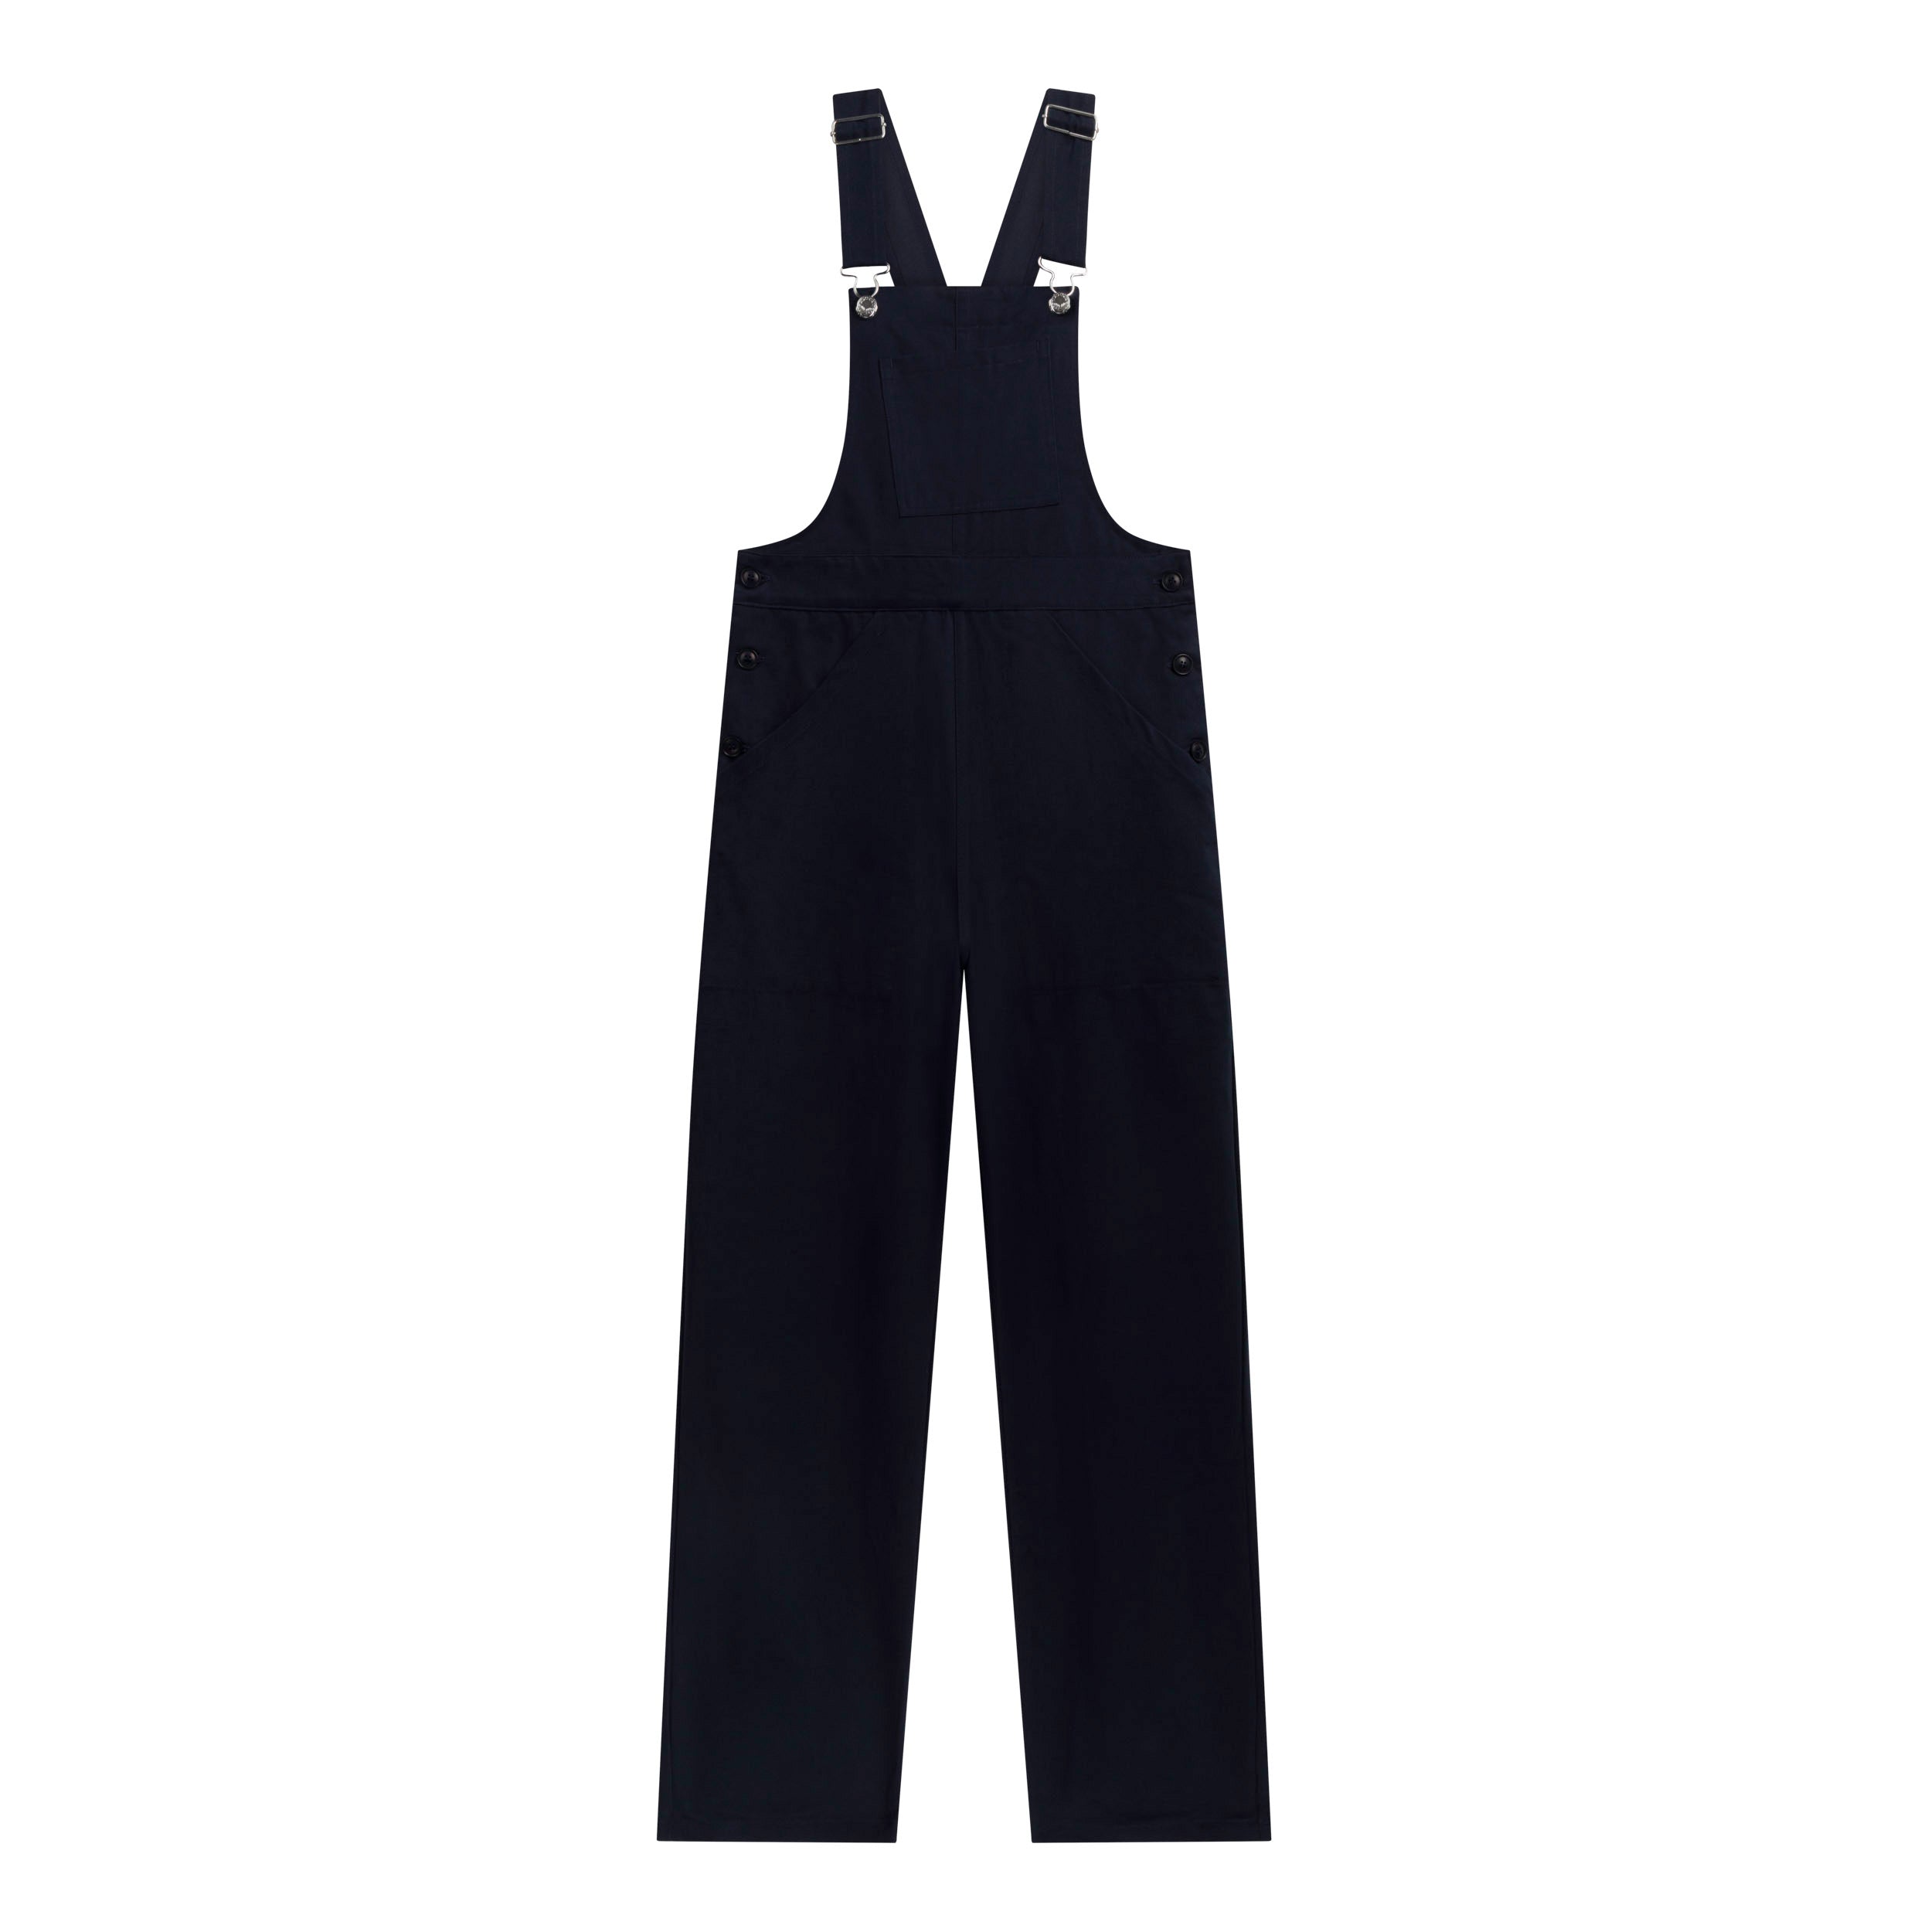 Carrier Company Women's Dungarees in Navy